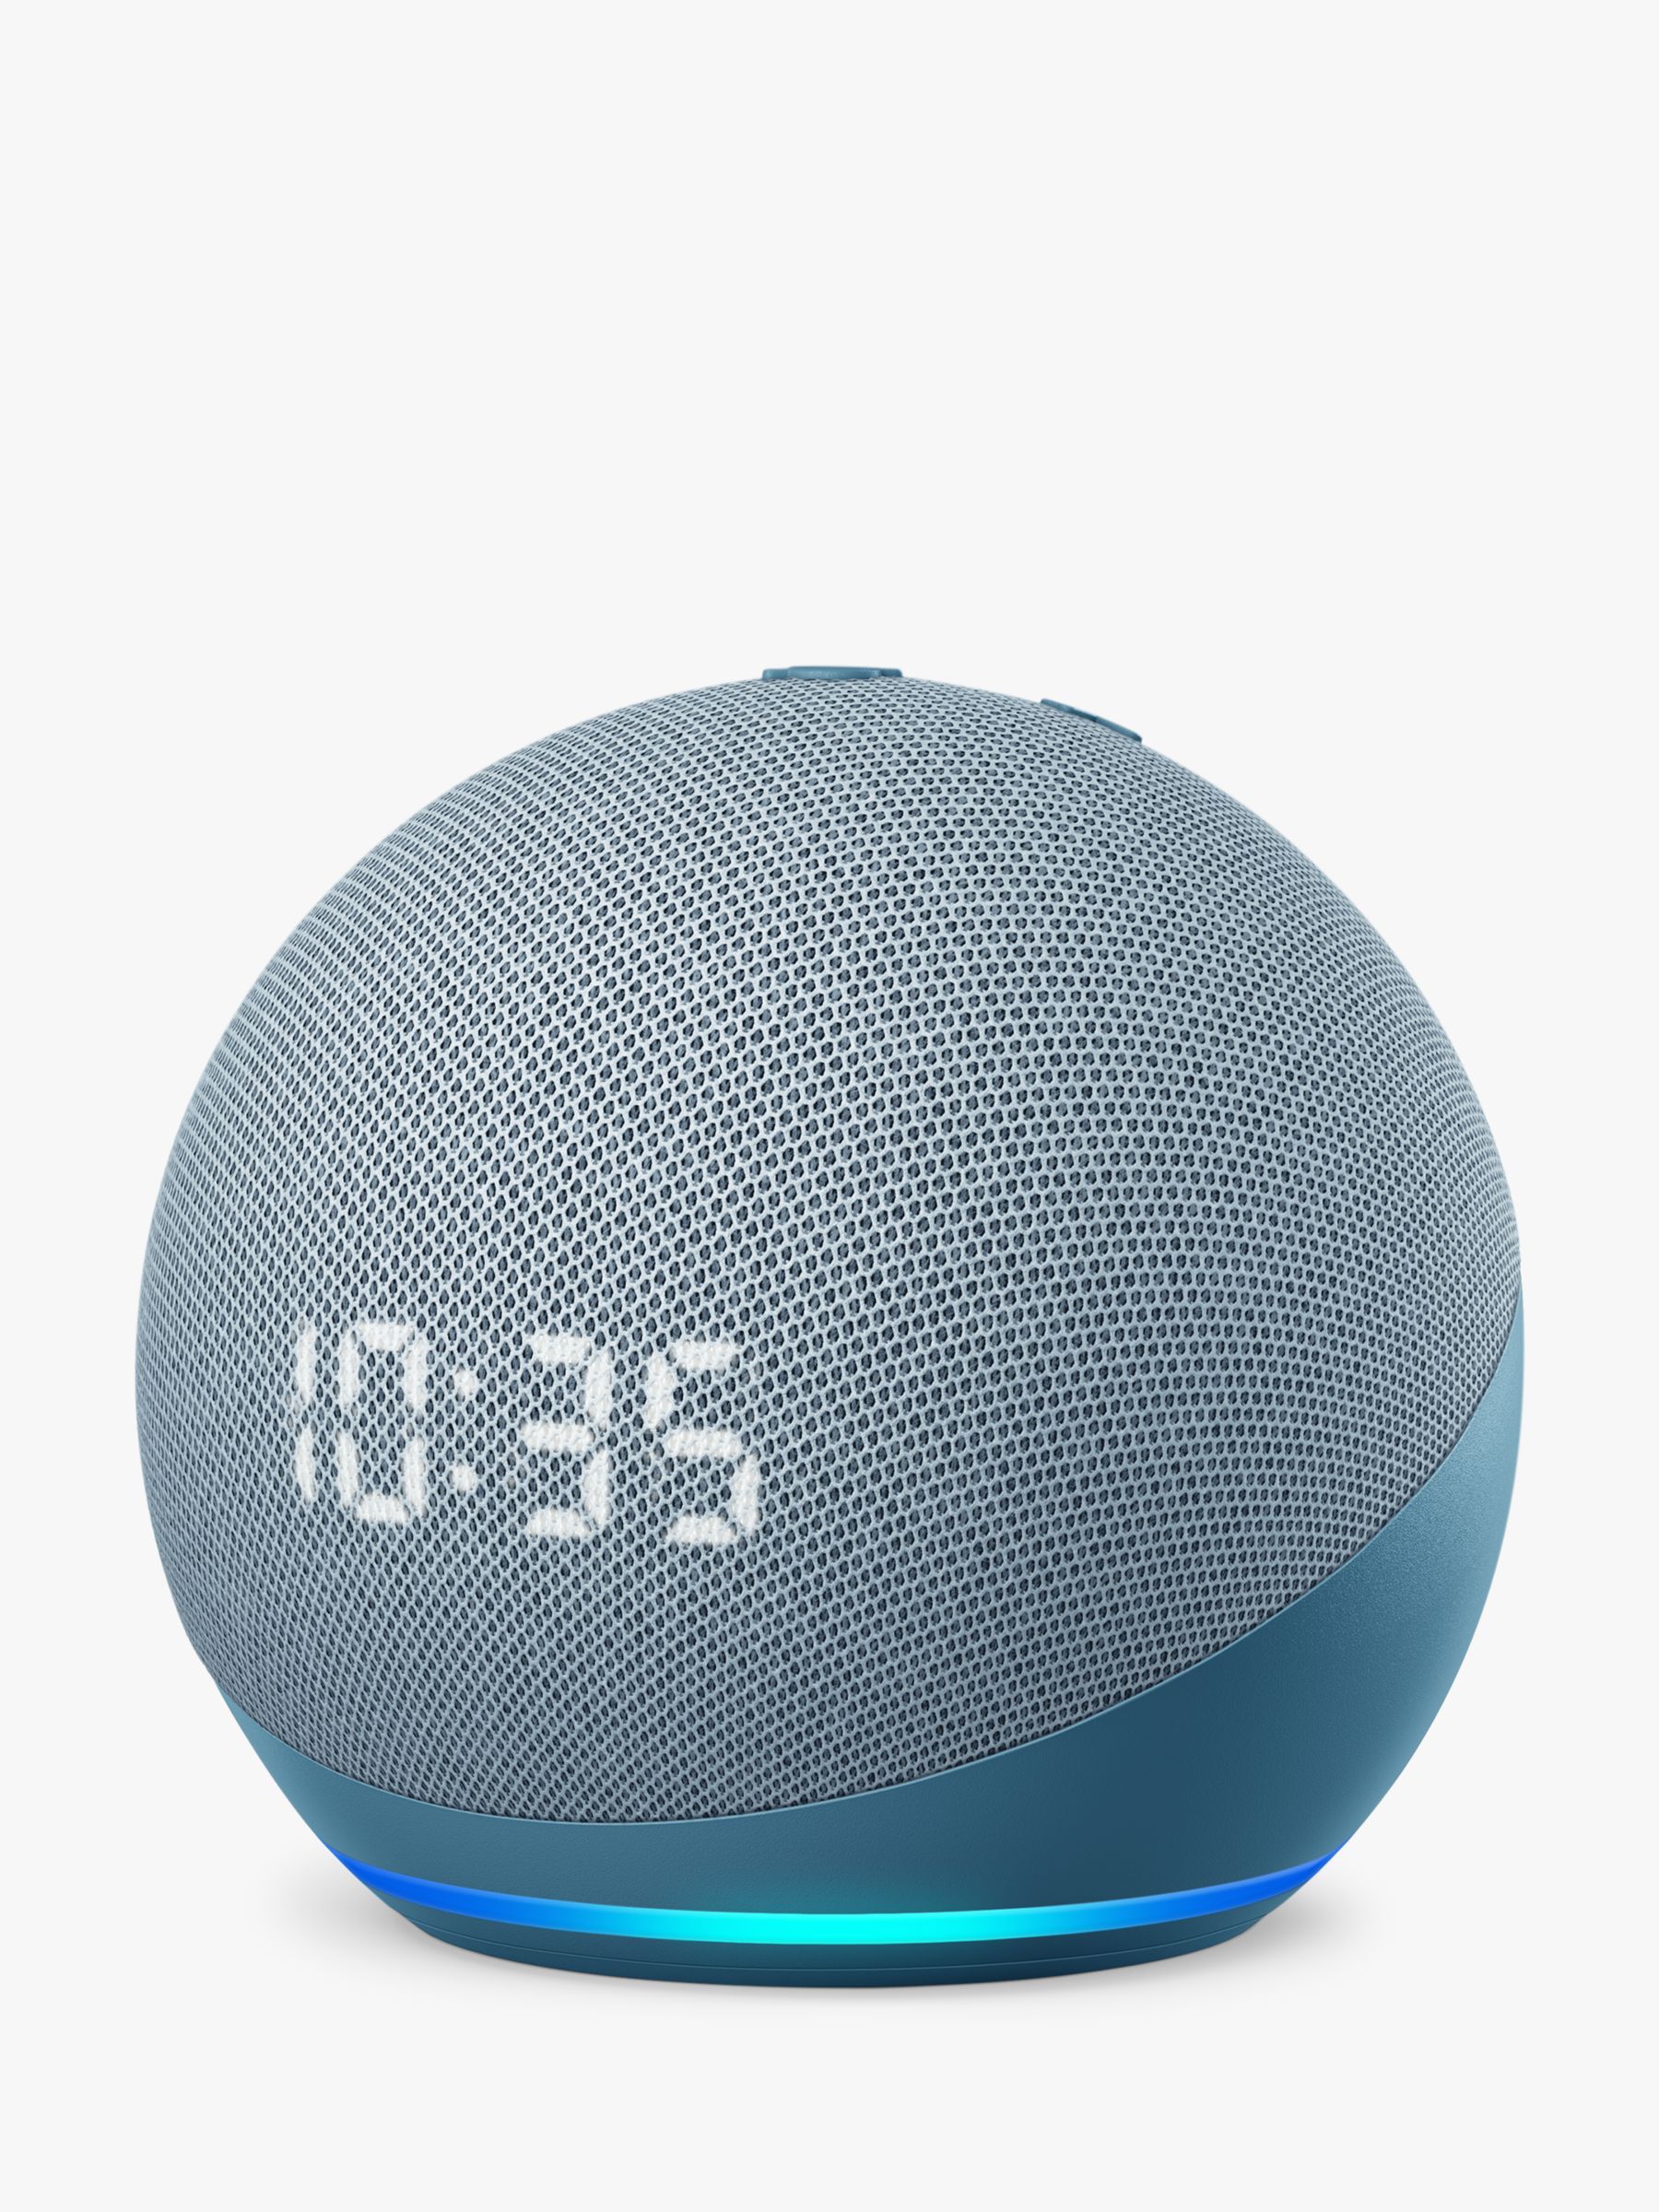 Amazon Echo Dot Smart Speaker with Clock and Alexa Voice Recognition & Control, 4th Generation